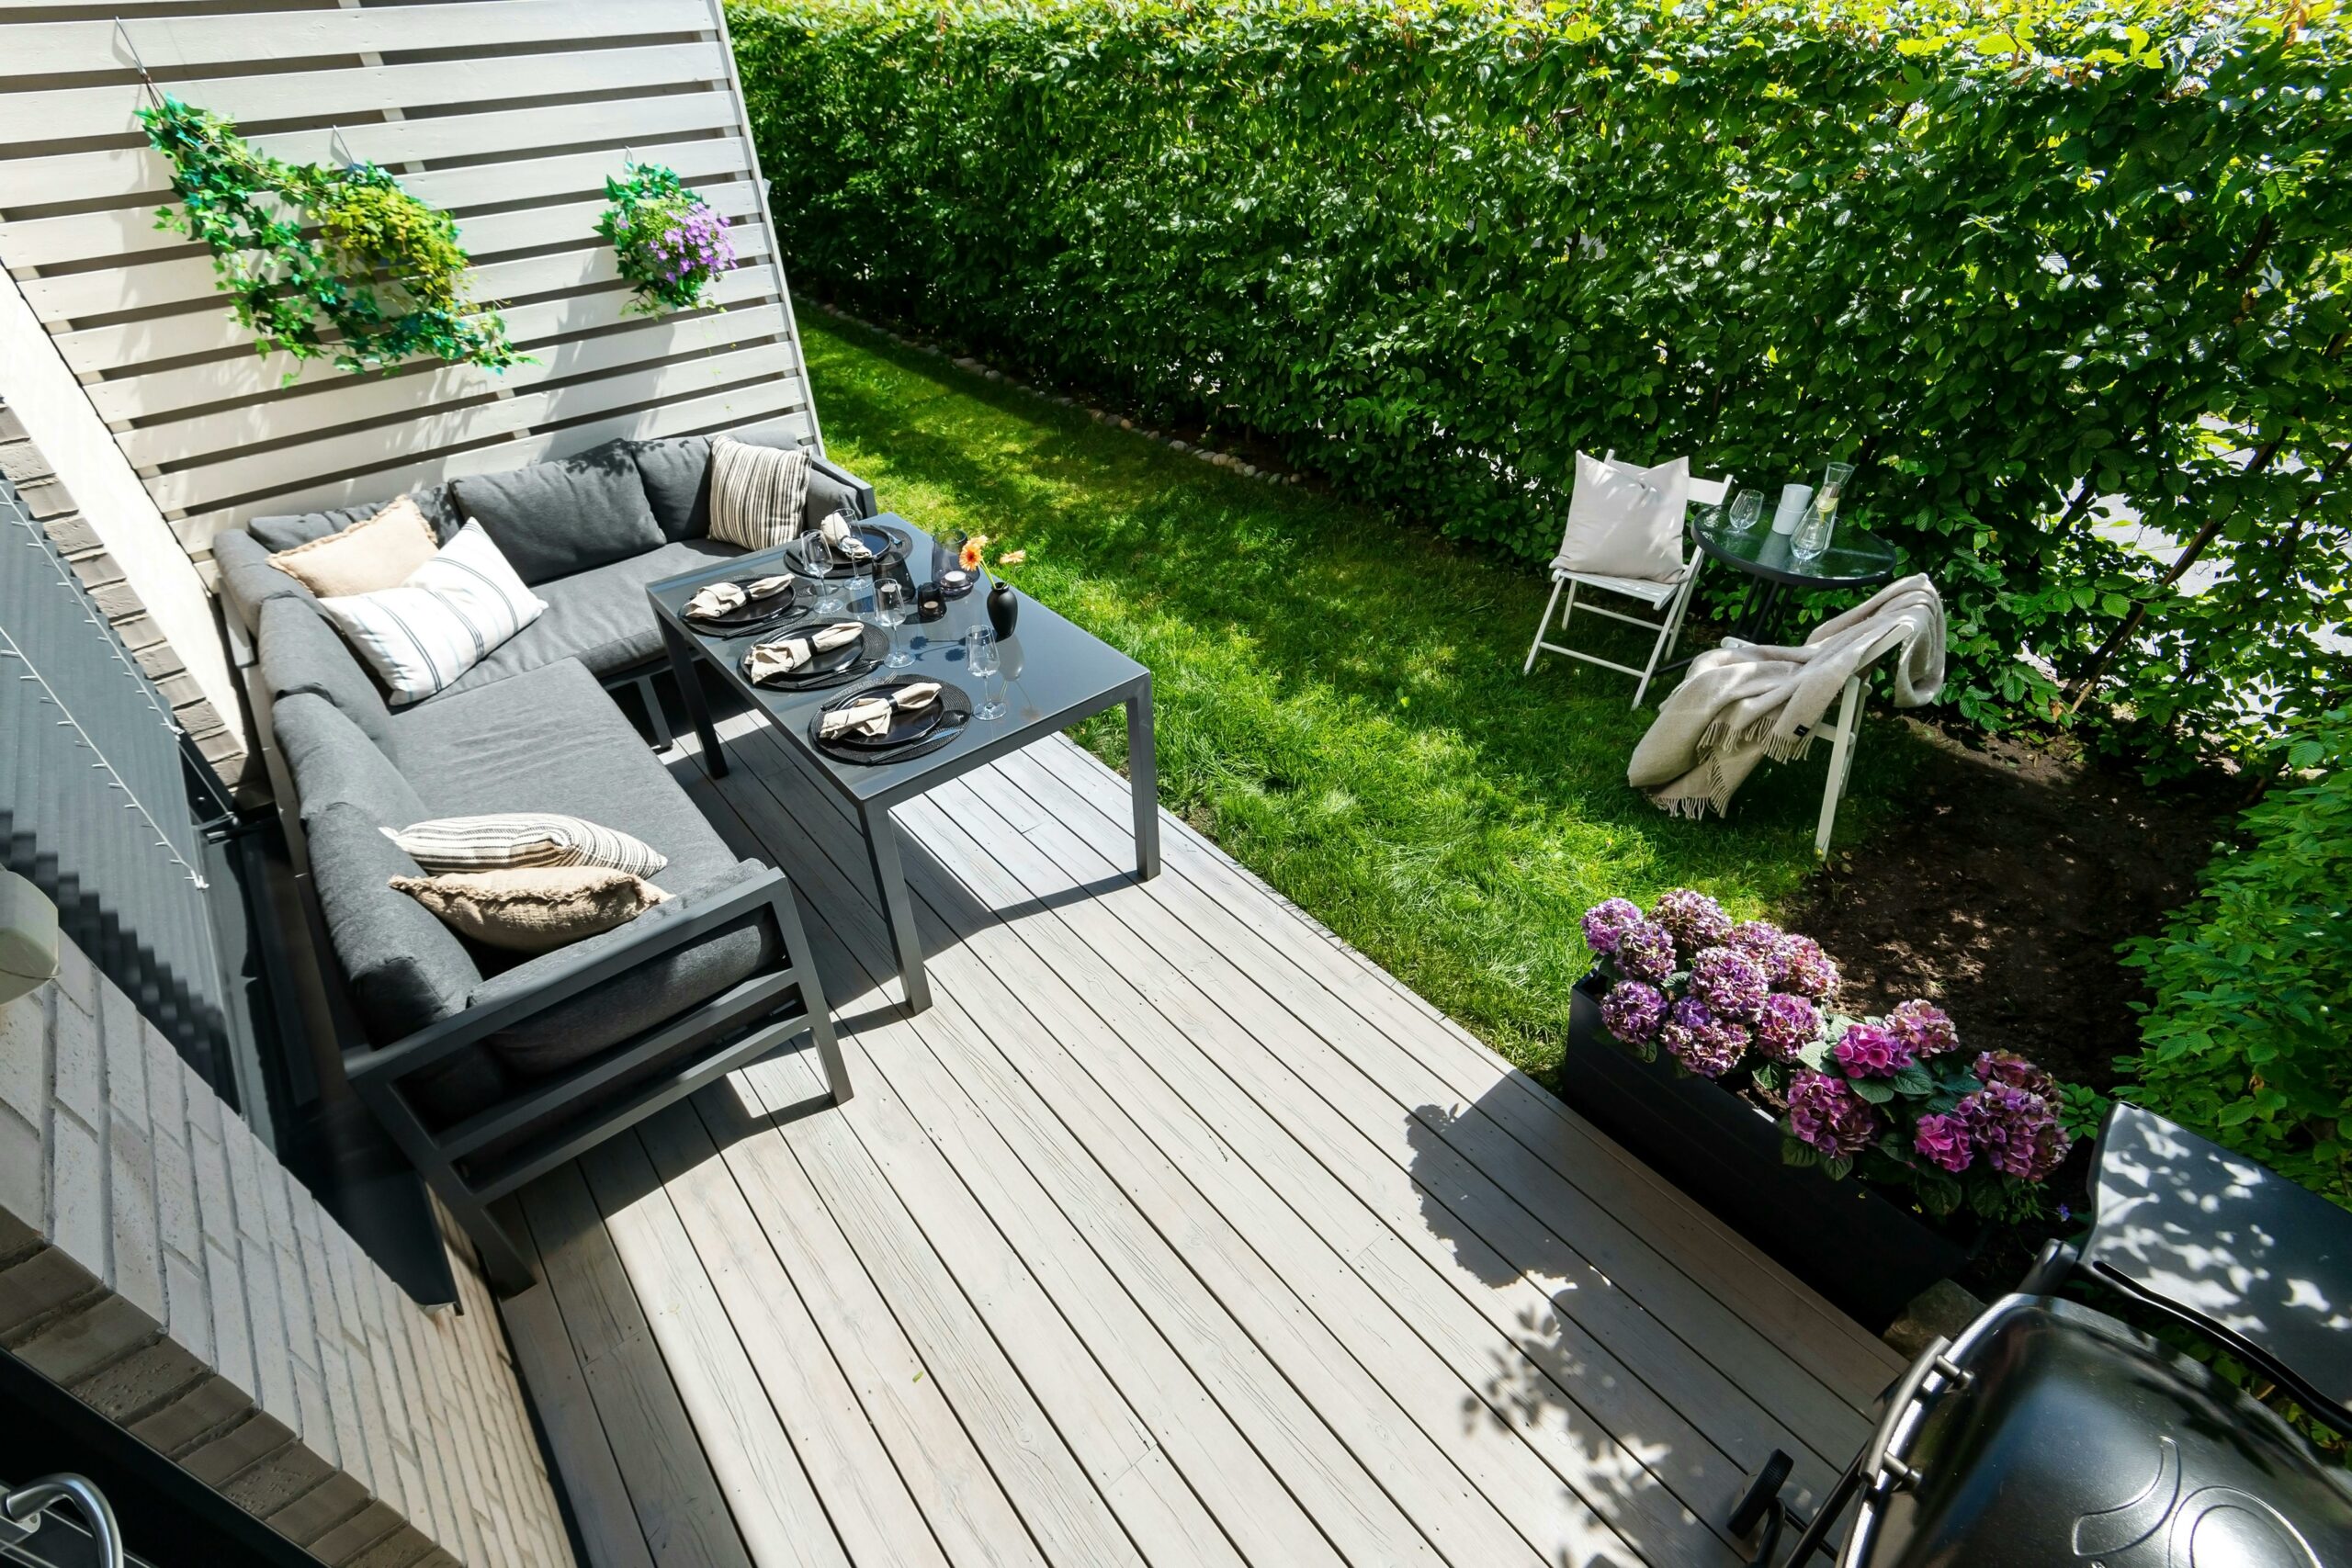 How to Choose the Right Patio Furniture for Maximum Protection